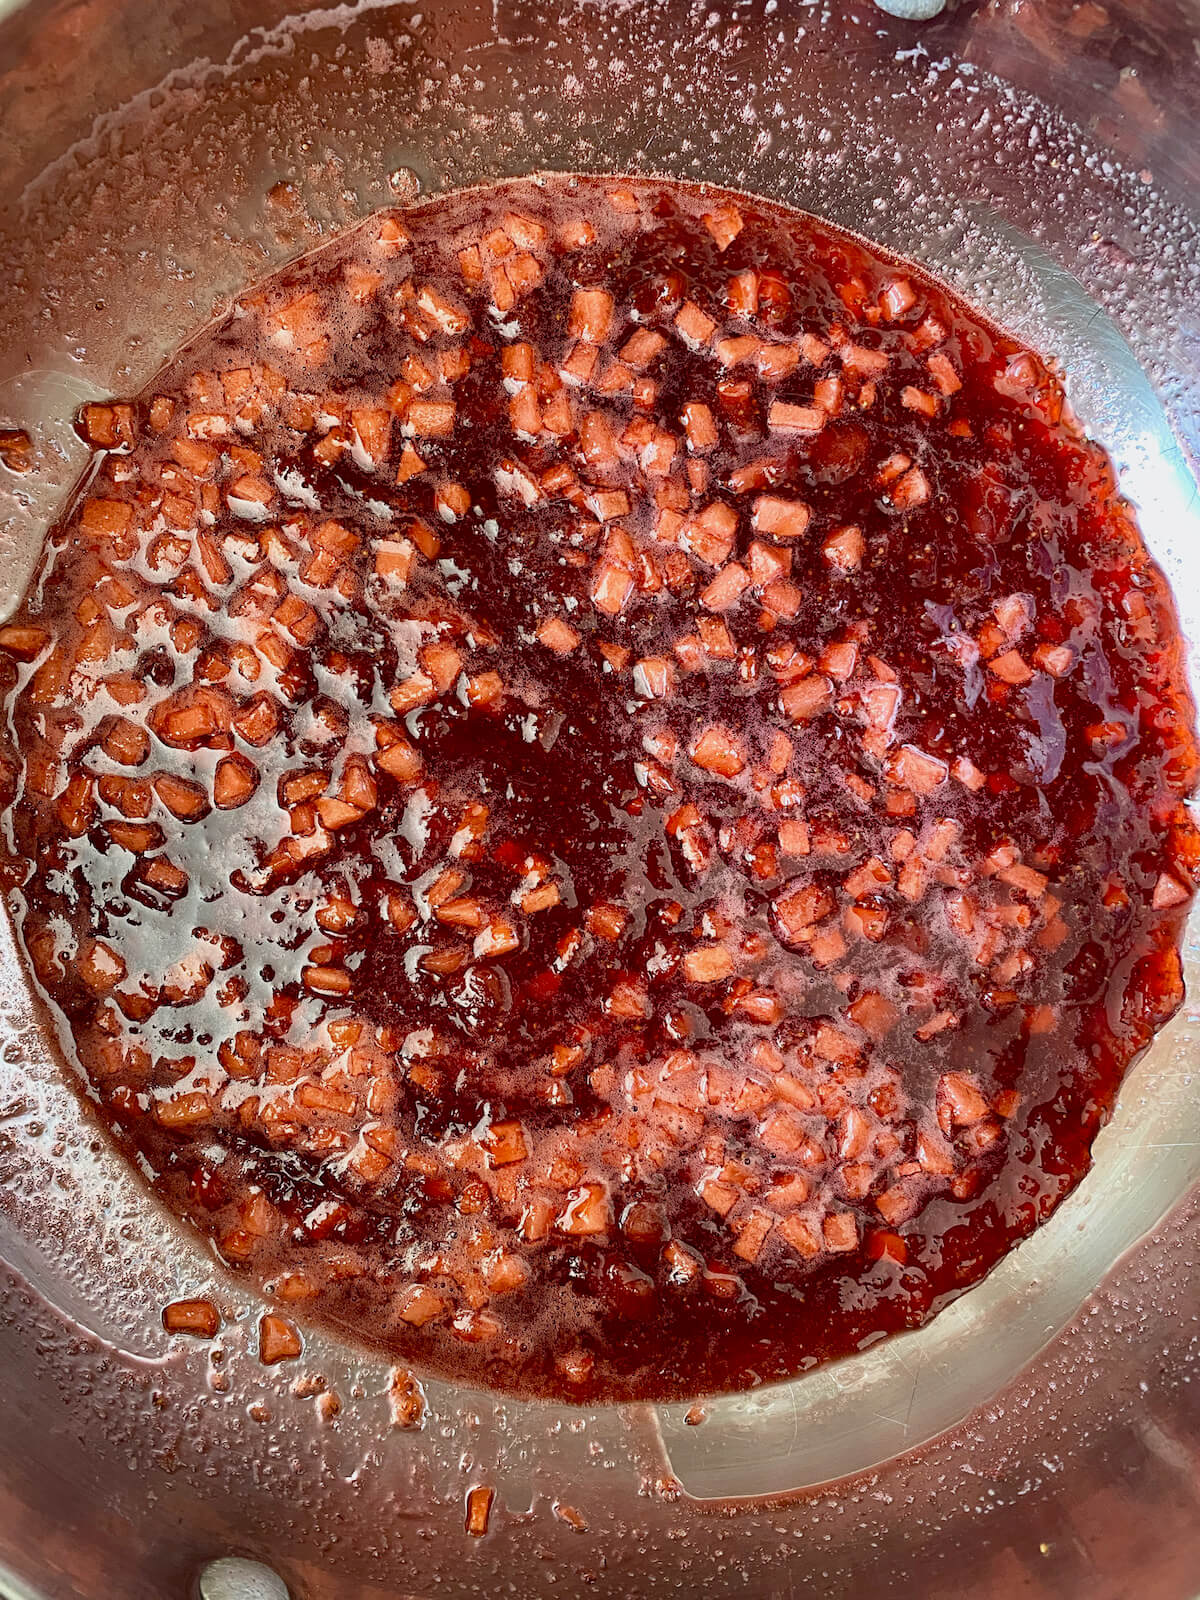 The finished strawberry apple jam in a stainless steel pot.